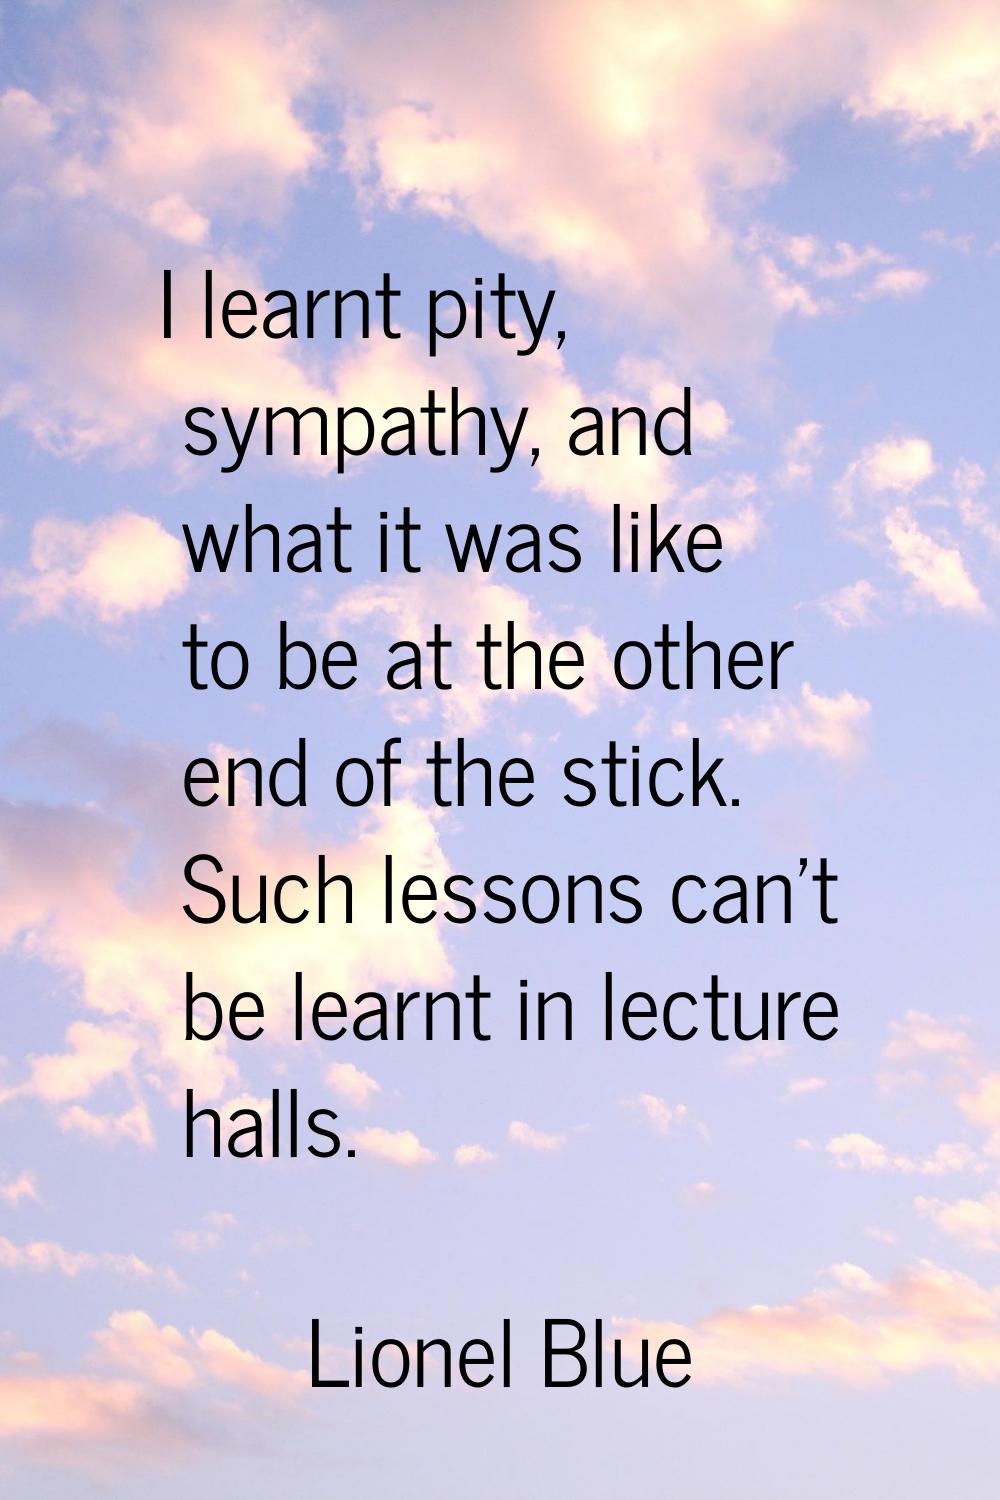 I learnt pity, sympathy, and what it was like to be at the other end of the stick. Such lessons can